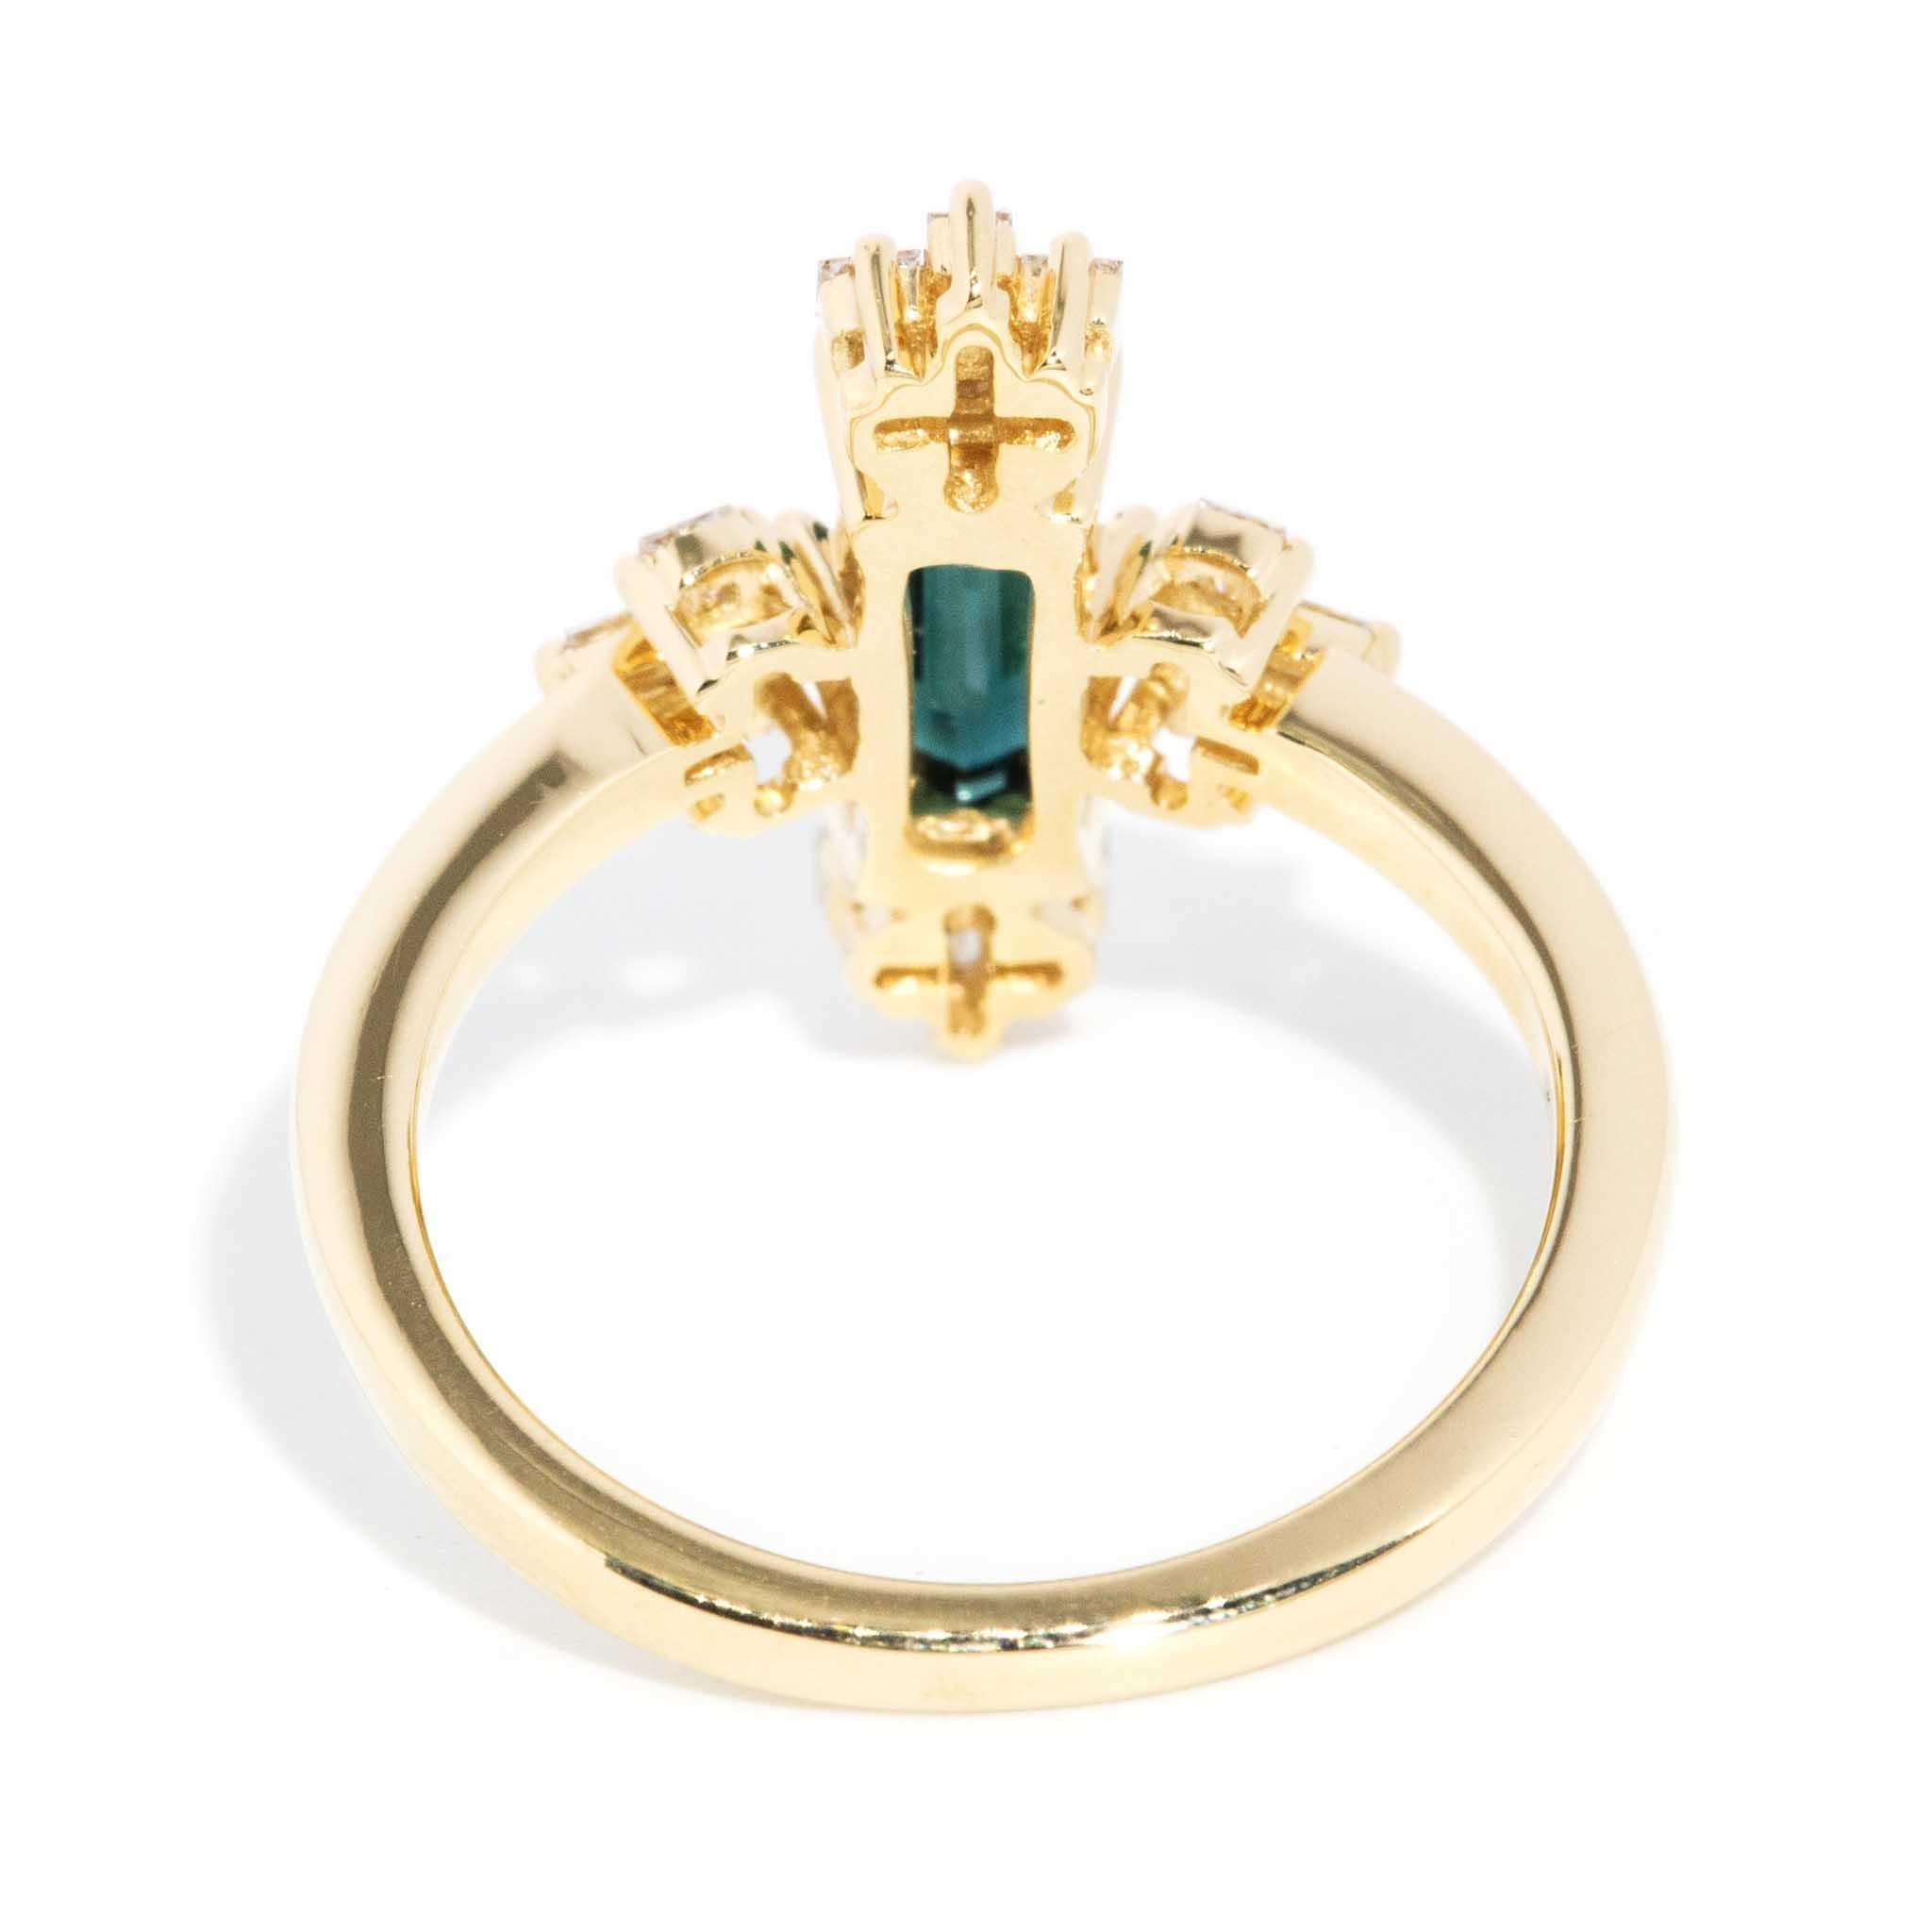 Contemporary Baguette Indicolite Tourmaline & Diamond Ring 18 Carat Yellow Gold For Sale 4